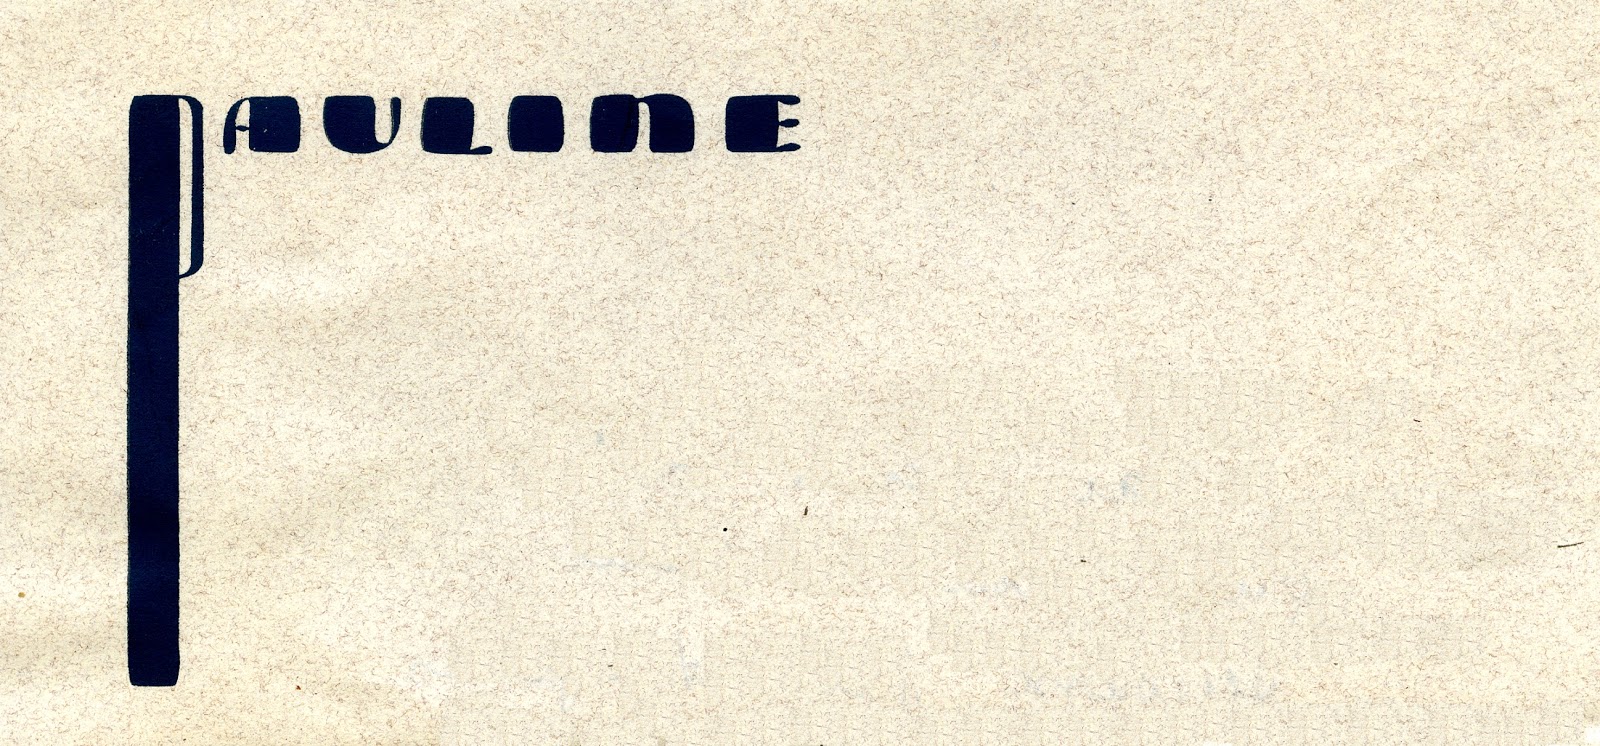 Pauline letterhead: the word "Pauline" in stylized letters with the letter P descending far below the rest of the letters.